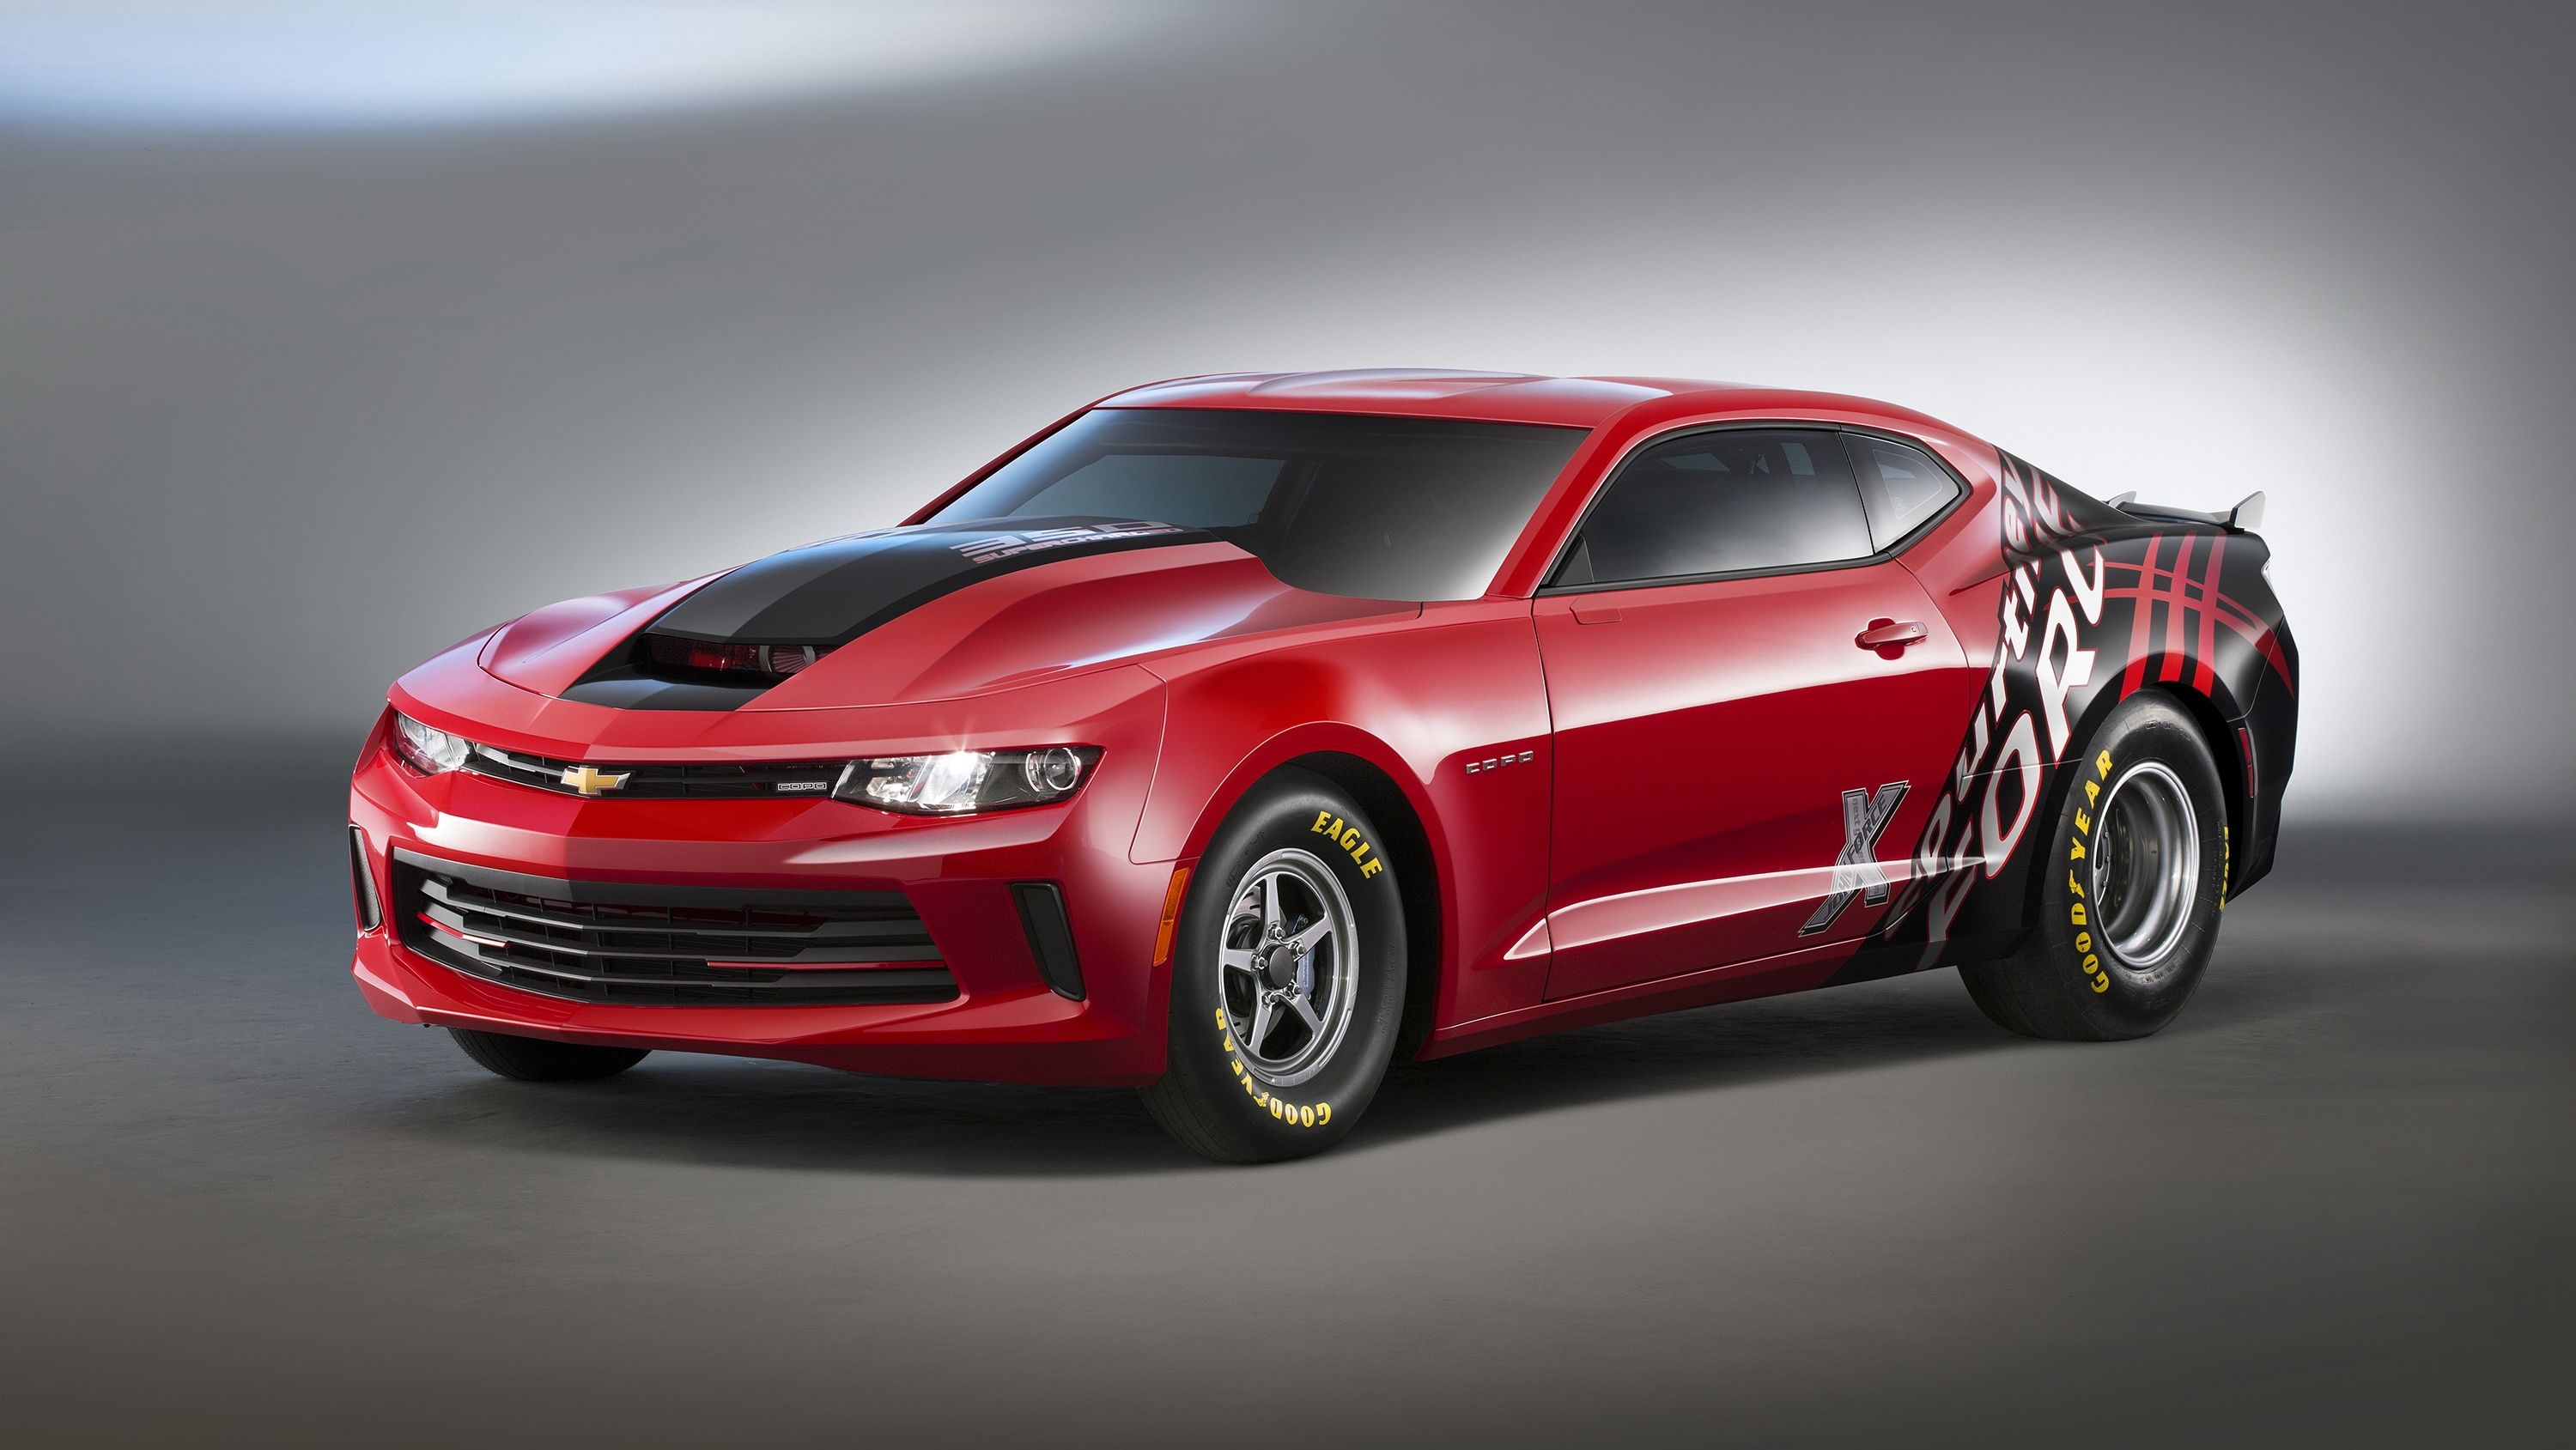 2016 Demand For the Chevrolet COPO Camaro Is Sky-High